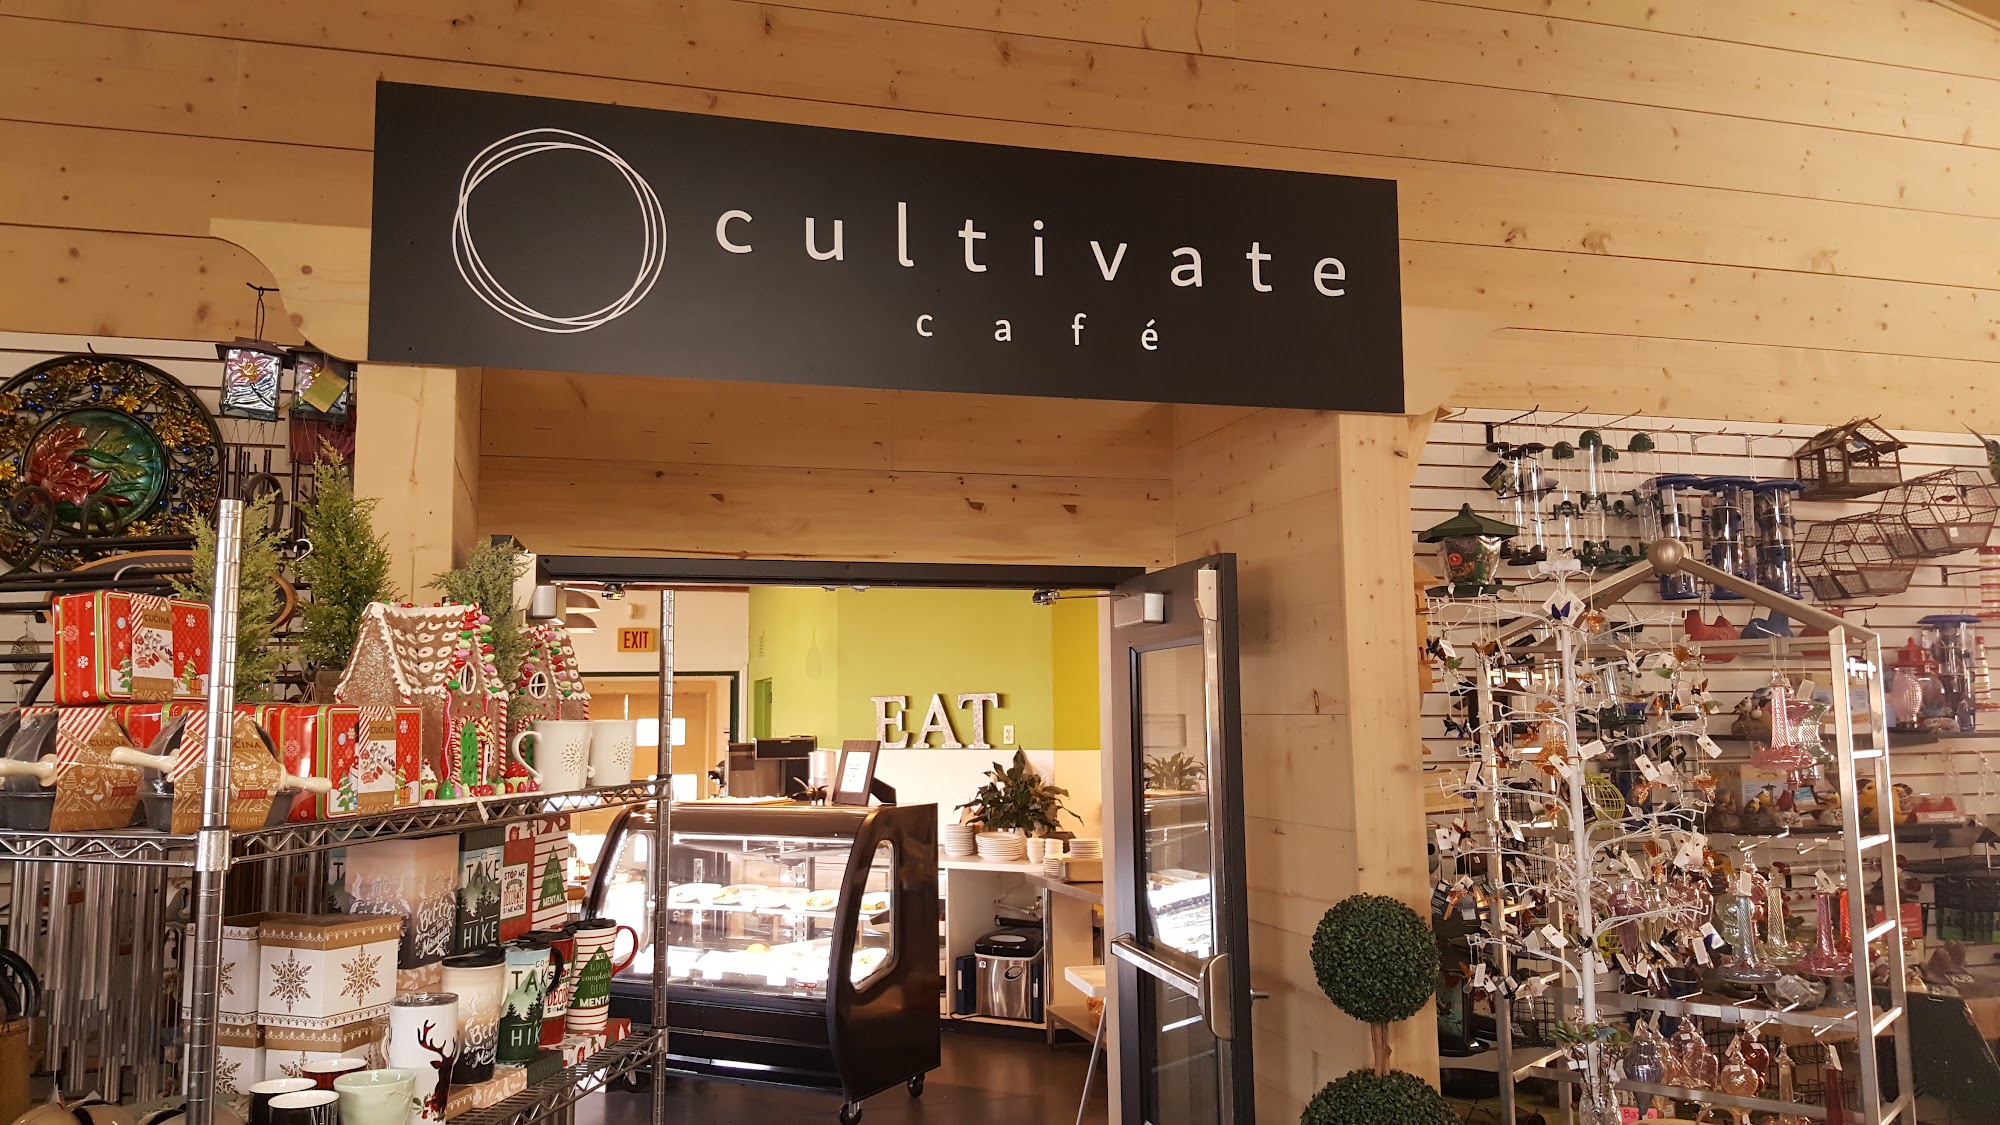 Cultivate Cafe